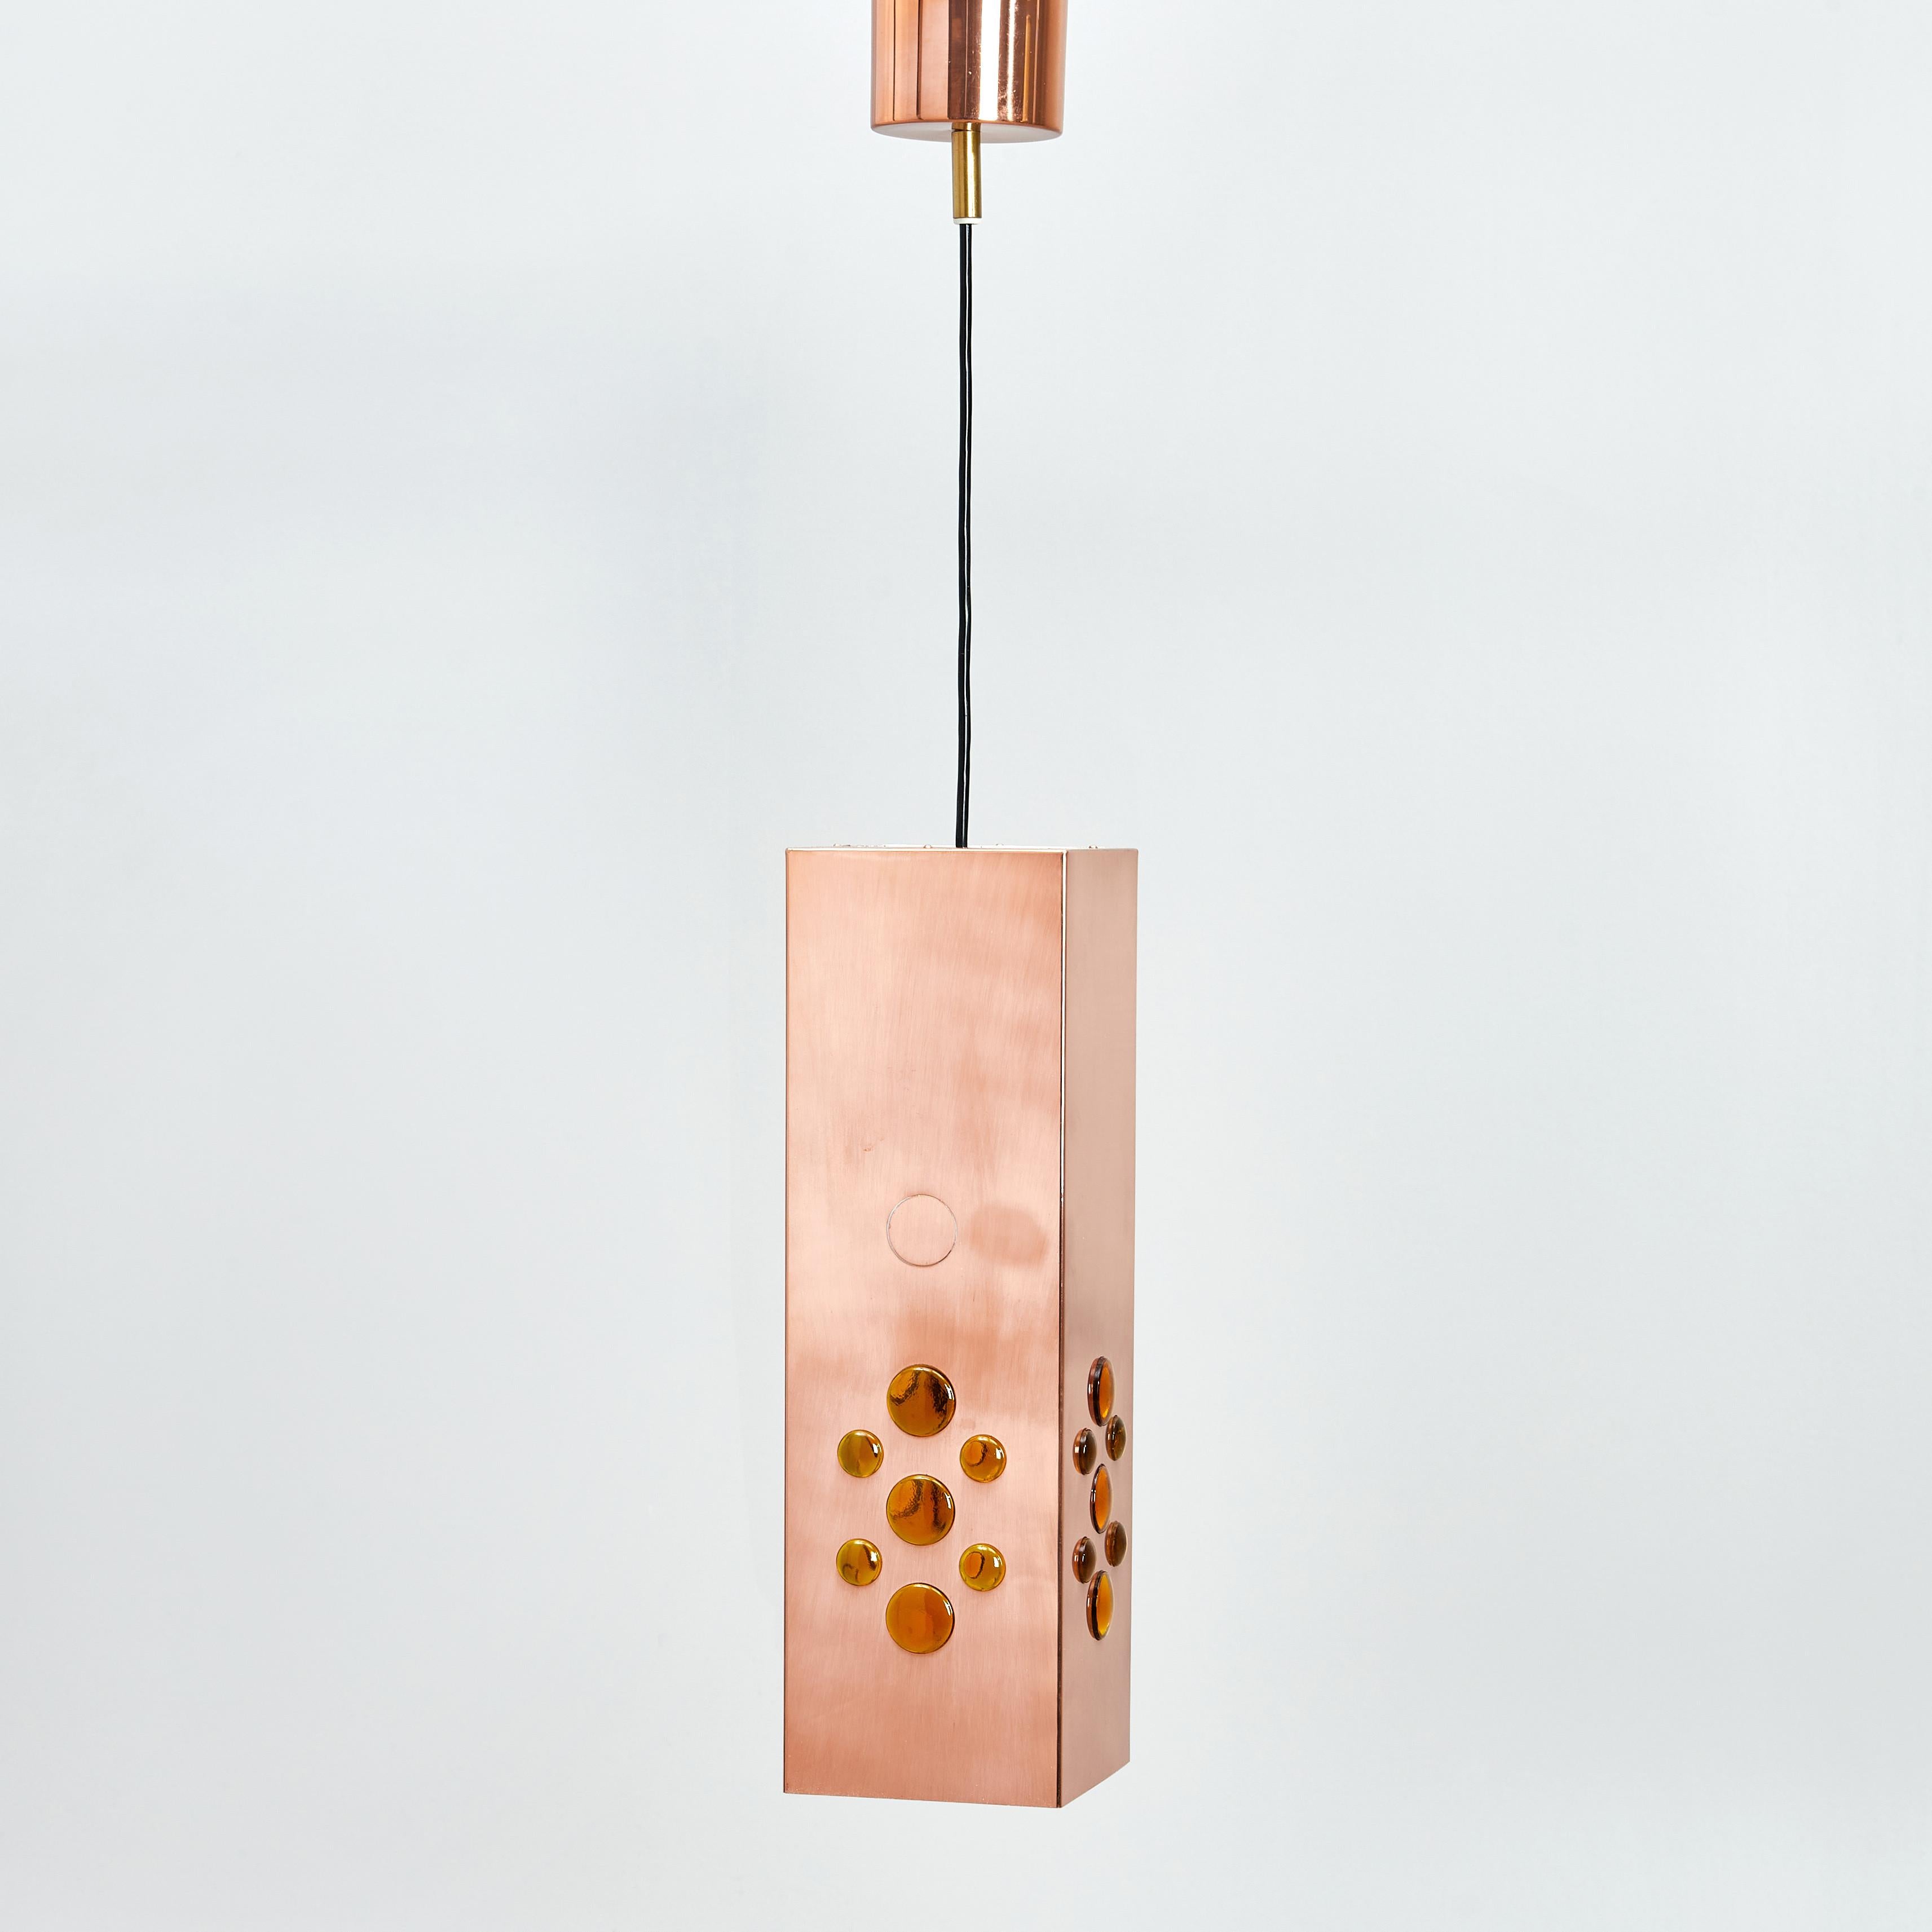 Square copper pendant lamp was designed by Hans-Agne Jakobsson for Markaryd in Sweden in the 1960s. The light spreads from the perforated copper part at the top and the white inside with orange glass beads to all sides below. All are original and in